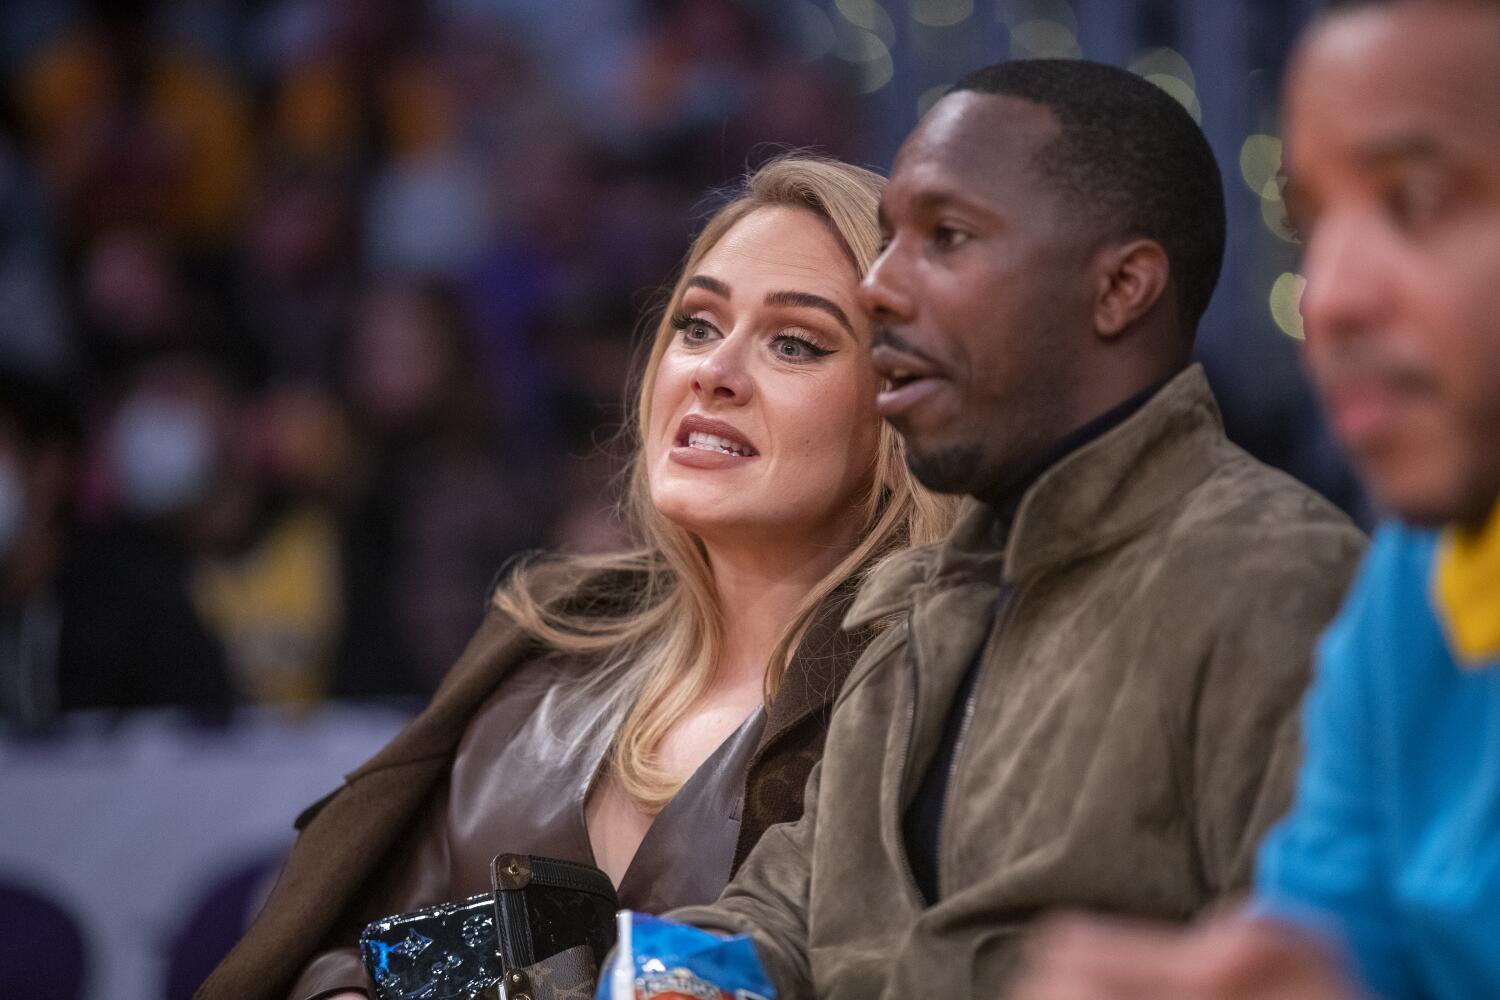 With Adele, Rich Paul says he's 'in a good space.' But go easy on the marriage questions